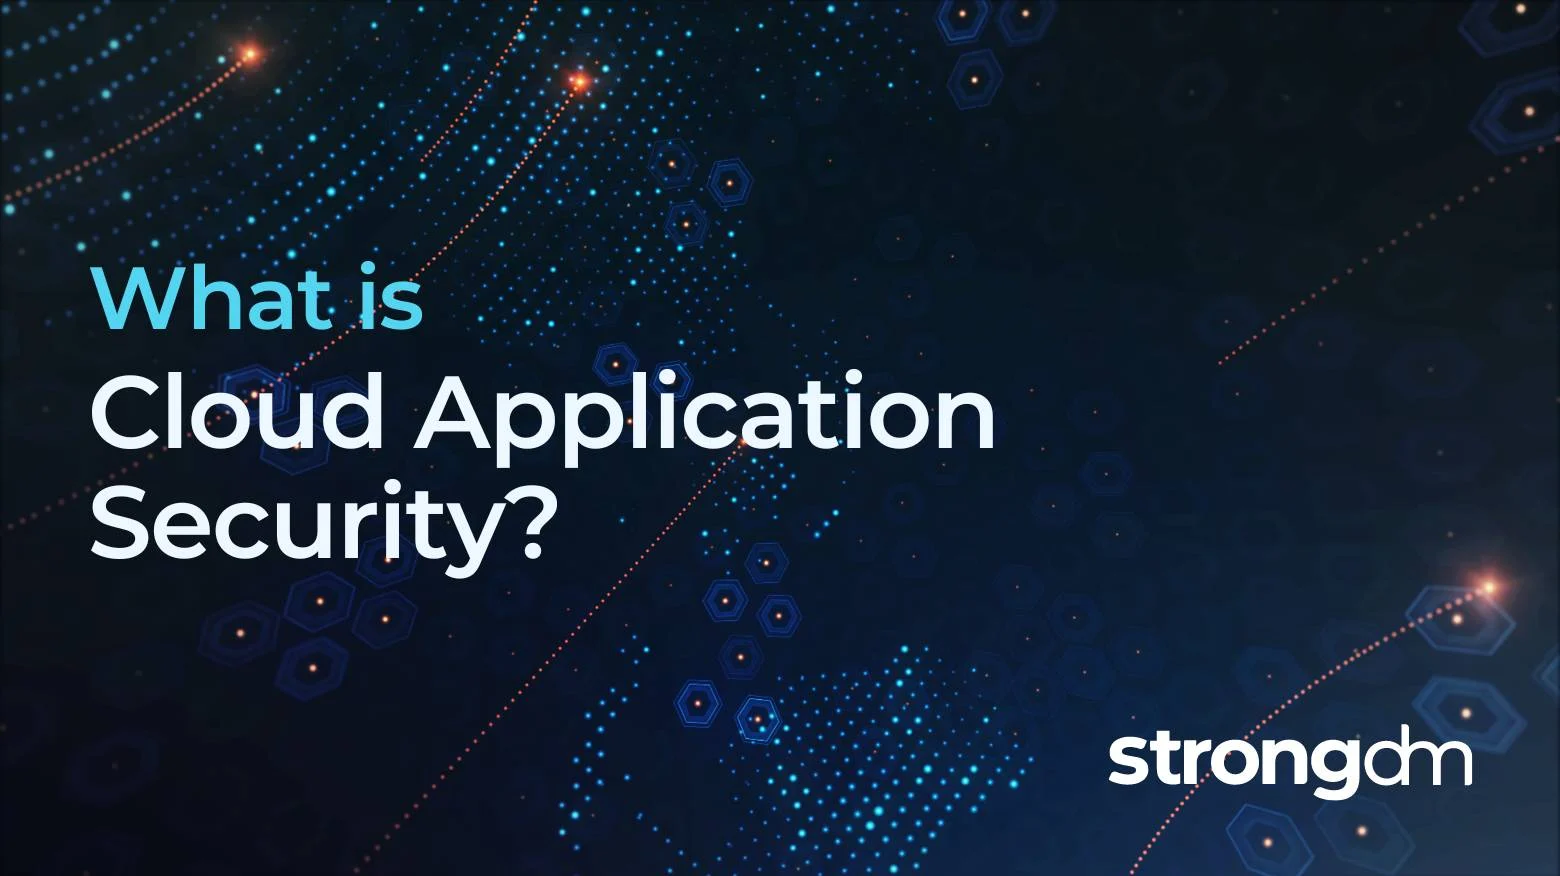 What is Cloud Application Security?